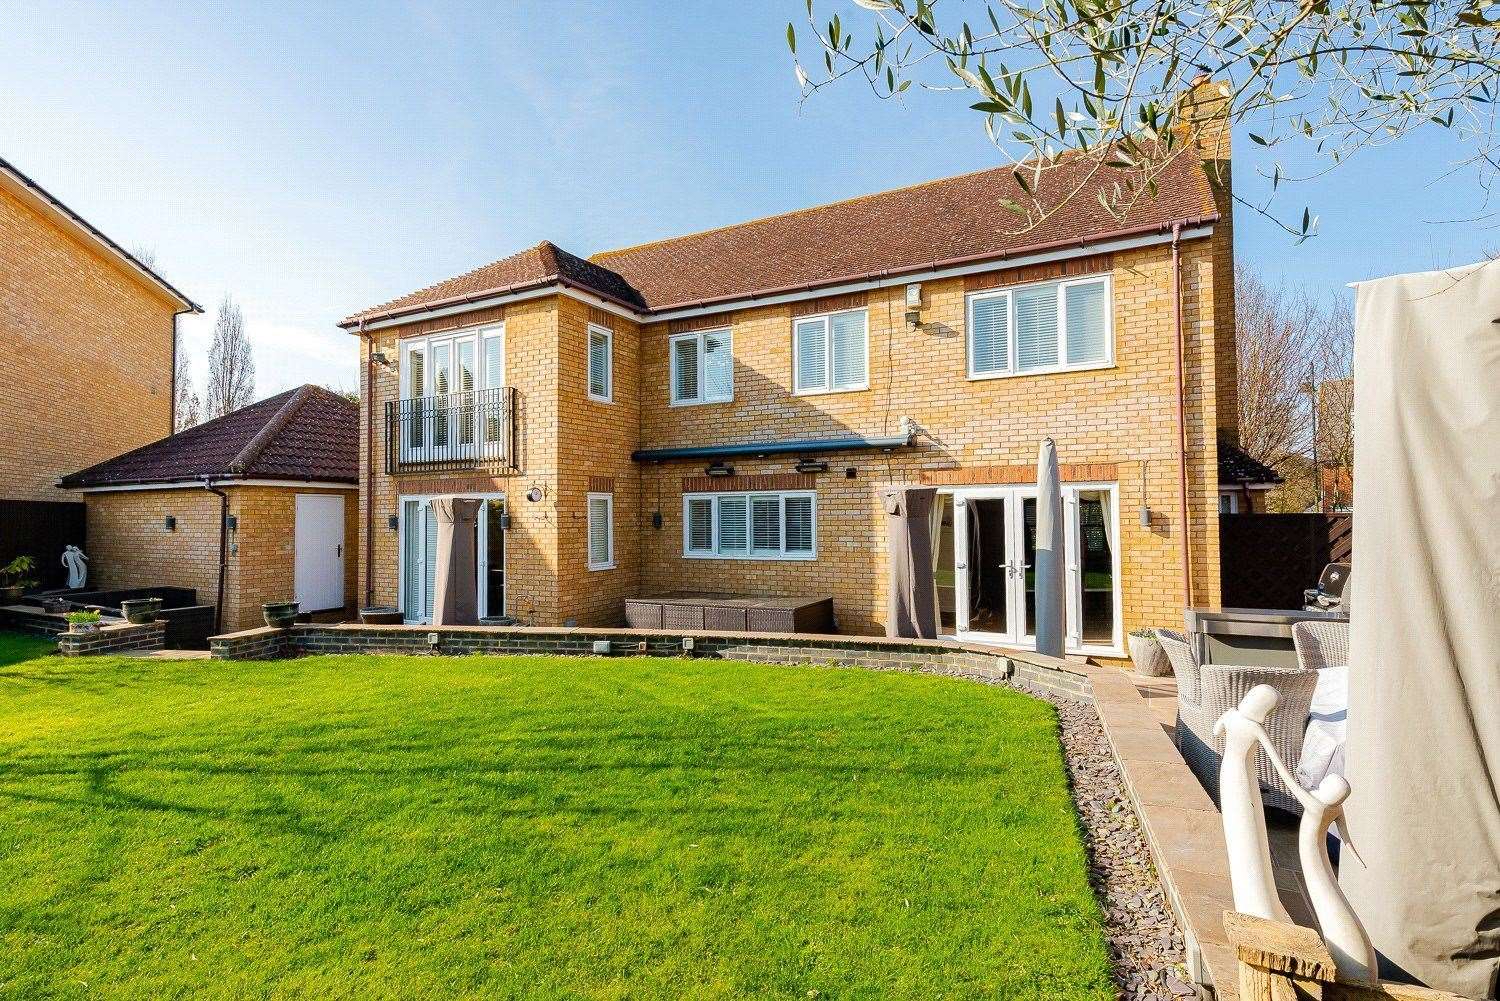 The house in Pearl Way is just a short walk from the Discovery School and Kings Hill Cricket Club